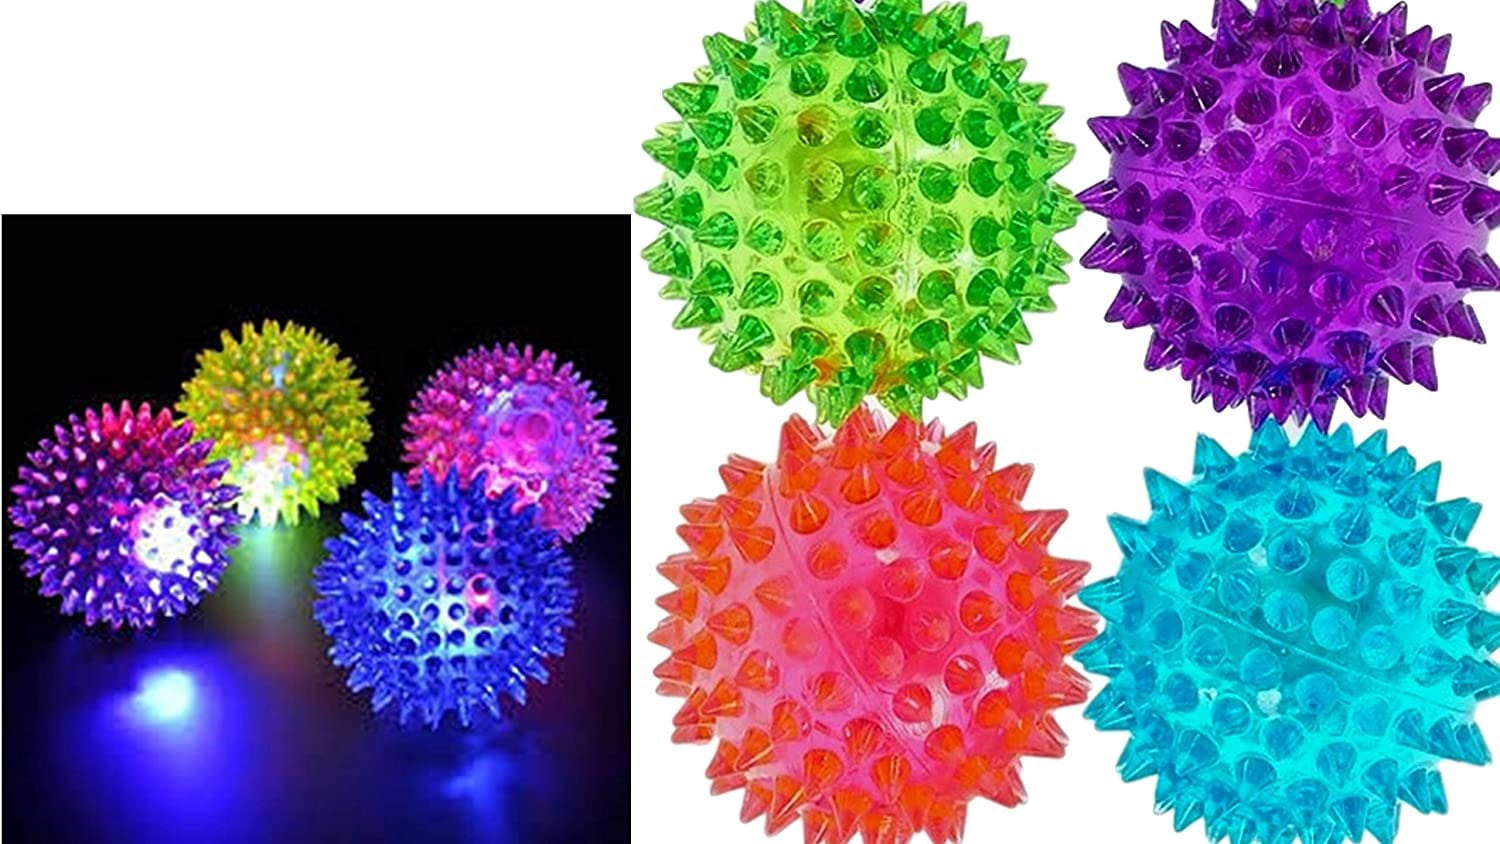 HOT BARGAINS 6 X Spike Balls Massage Ball With Flashing Led Light Bouncy Spiky Balls Pack Of 6 Great Fun For Kids And Pets Party bag Fillers 